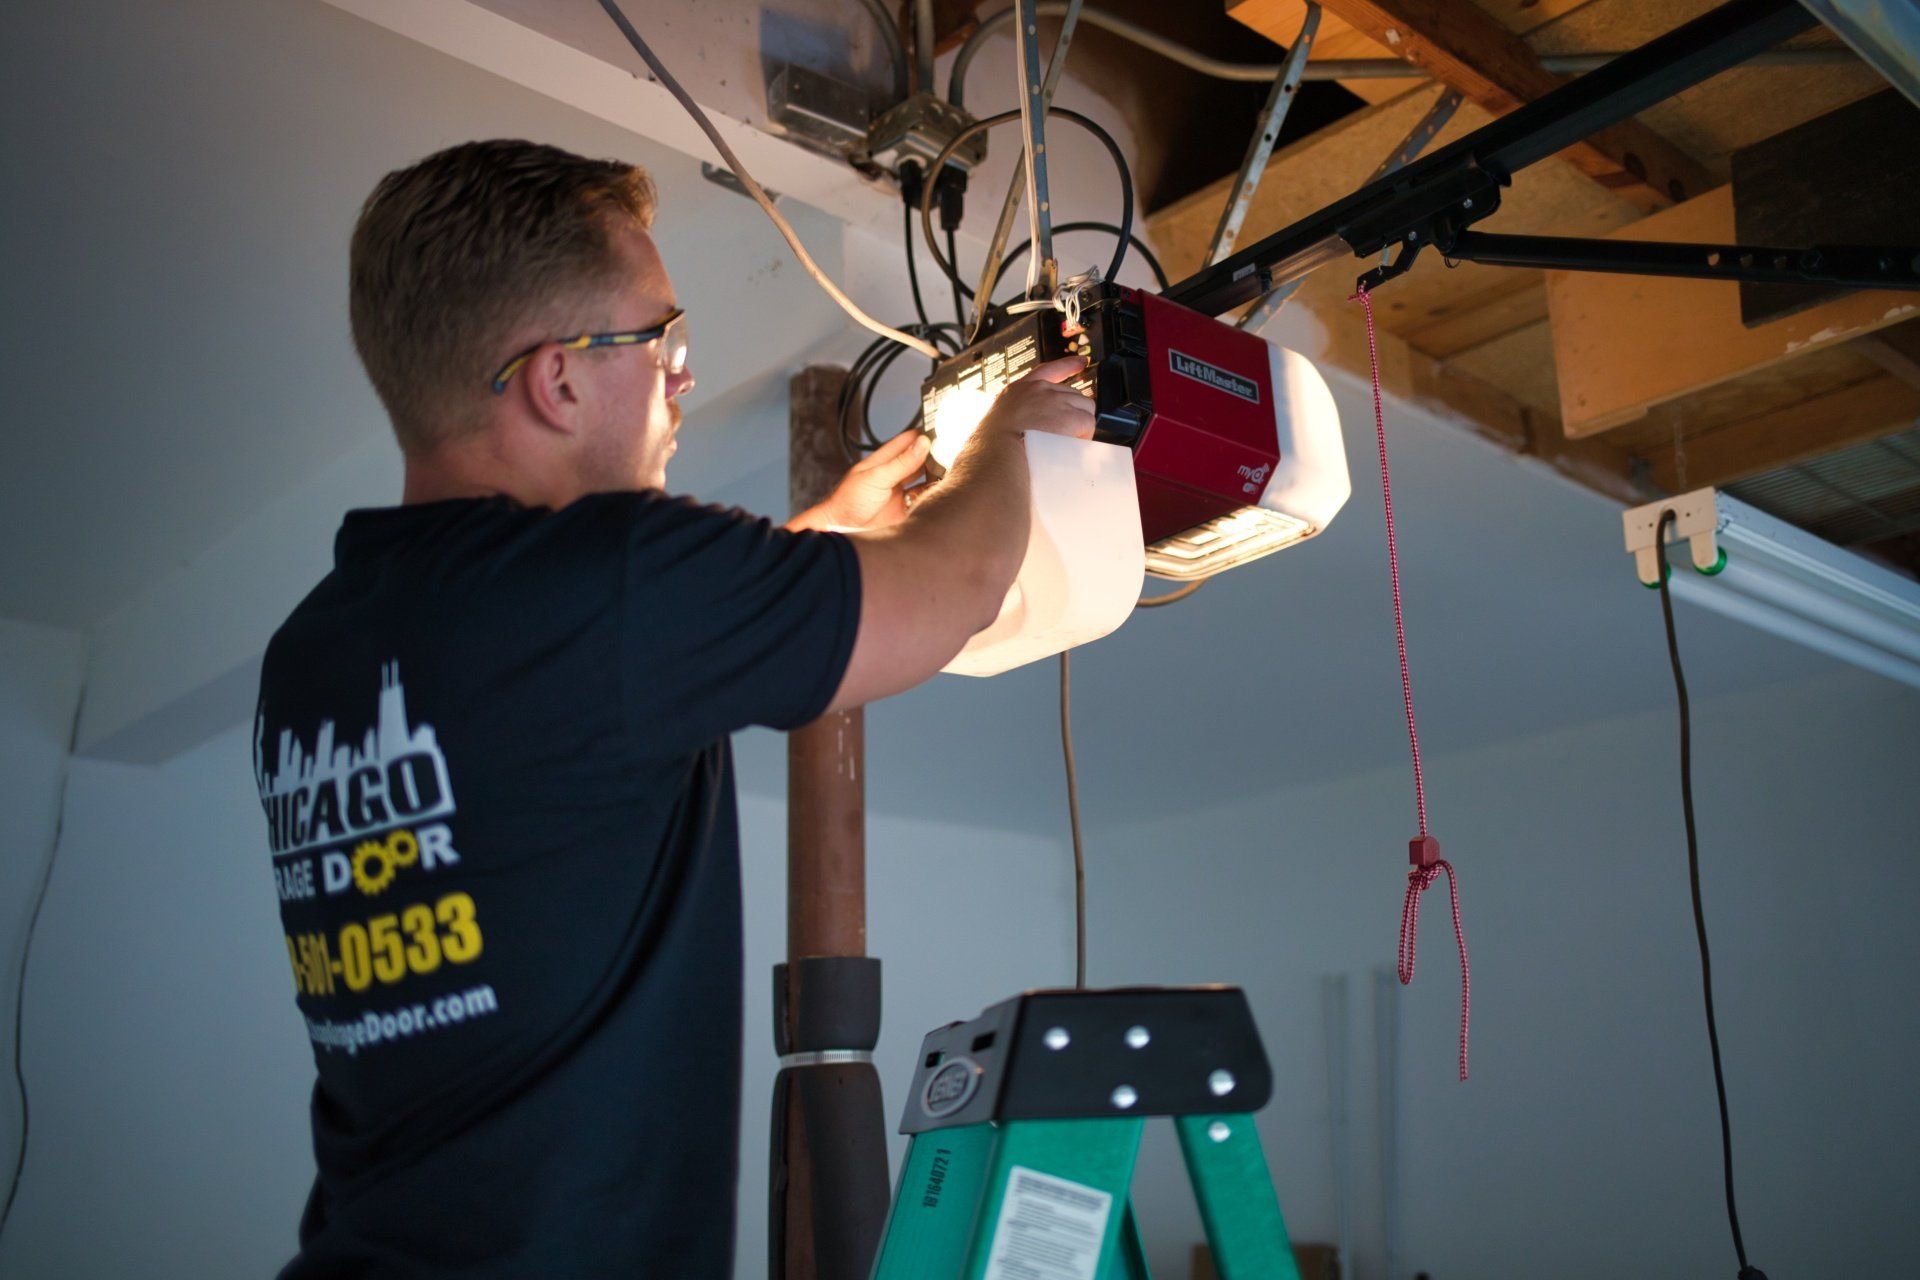 Residential garage door repair and installation in Great Lakes, IL